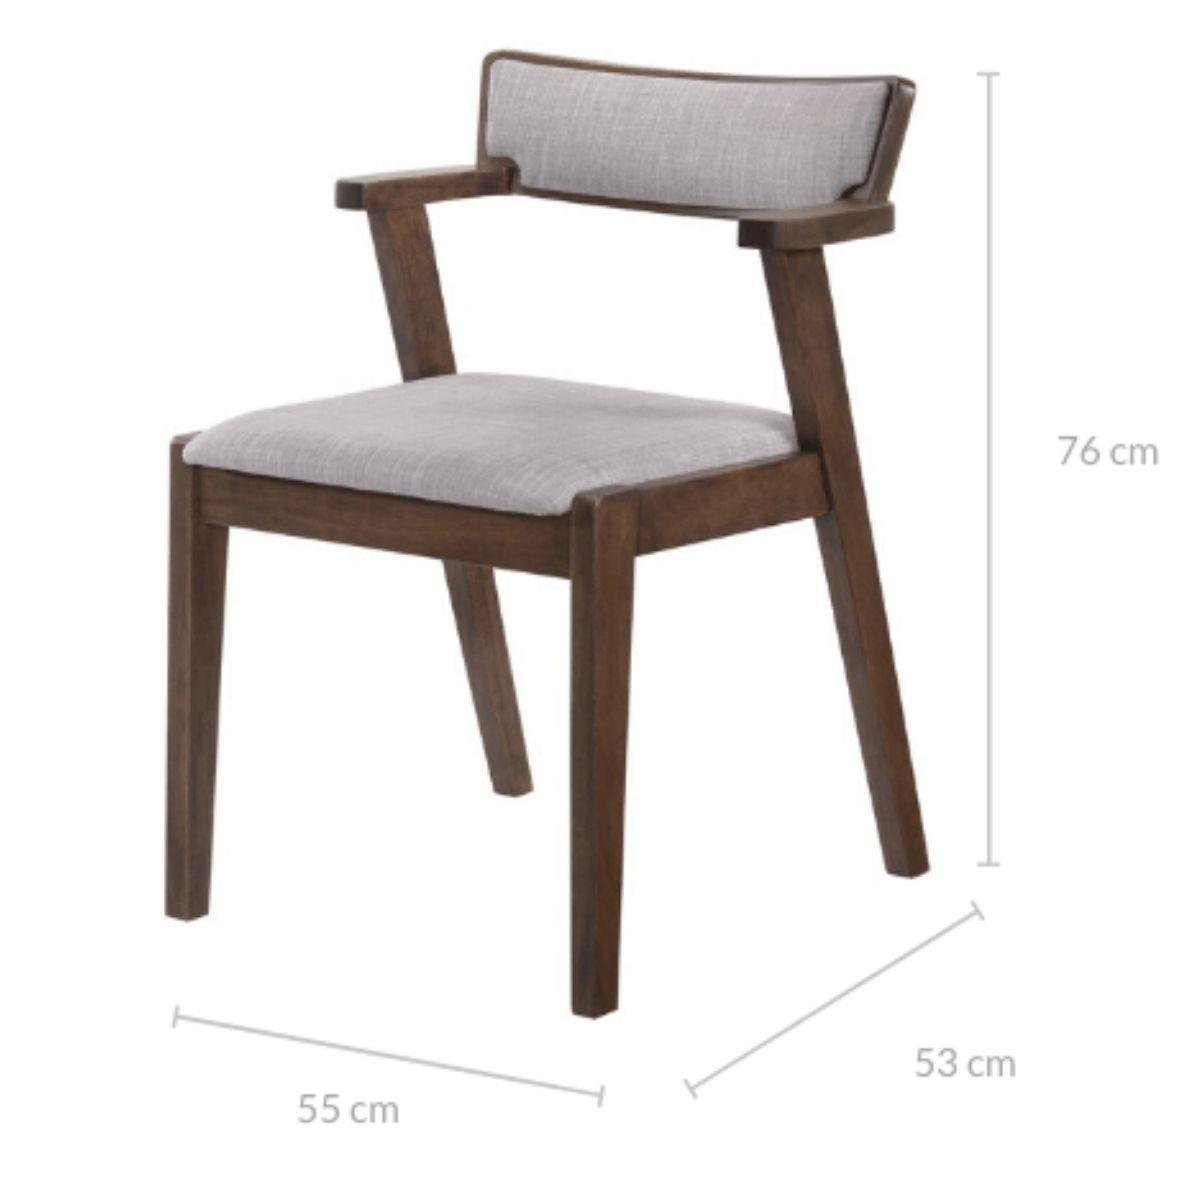 Elsa Dining chair with arm rest in GREY